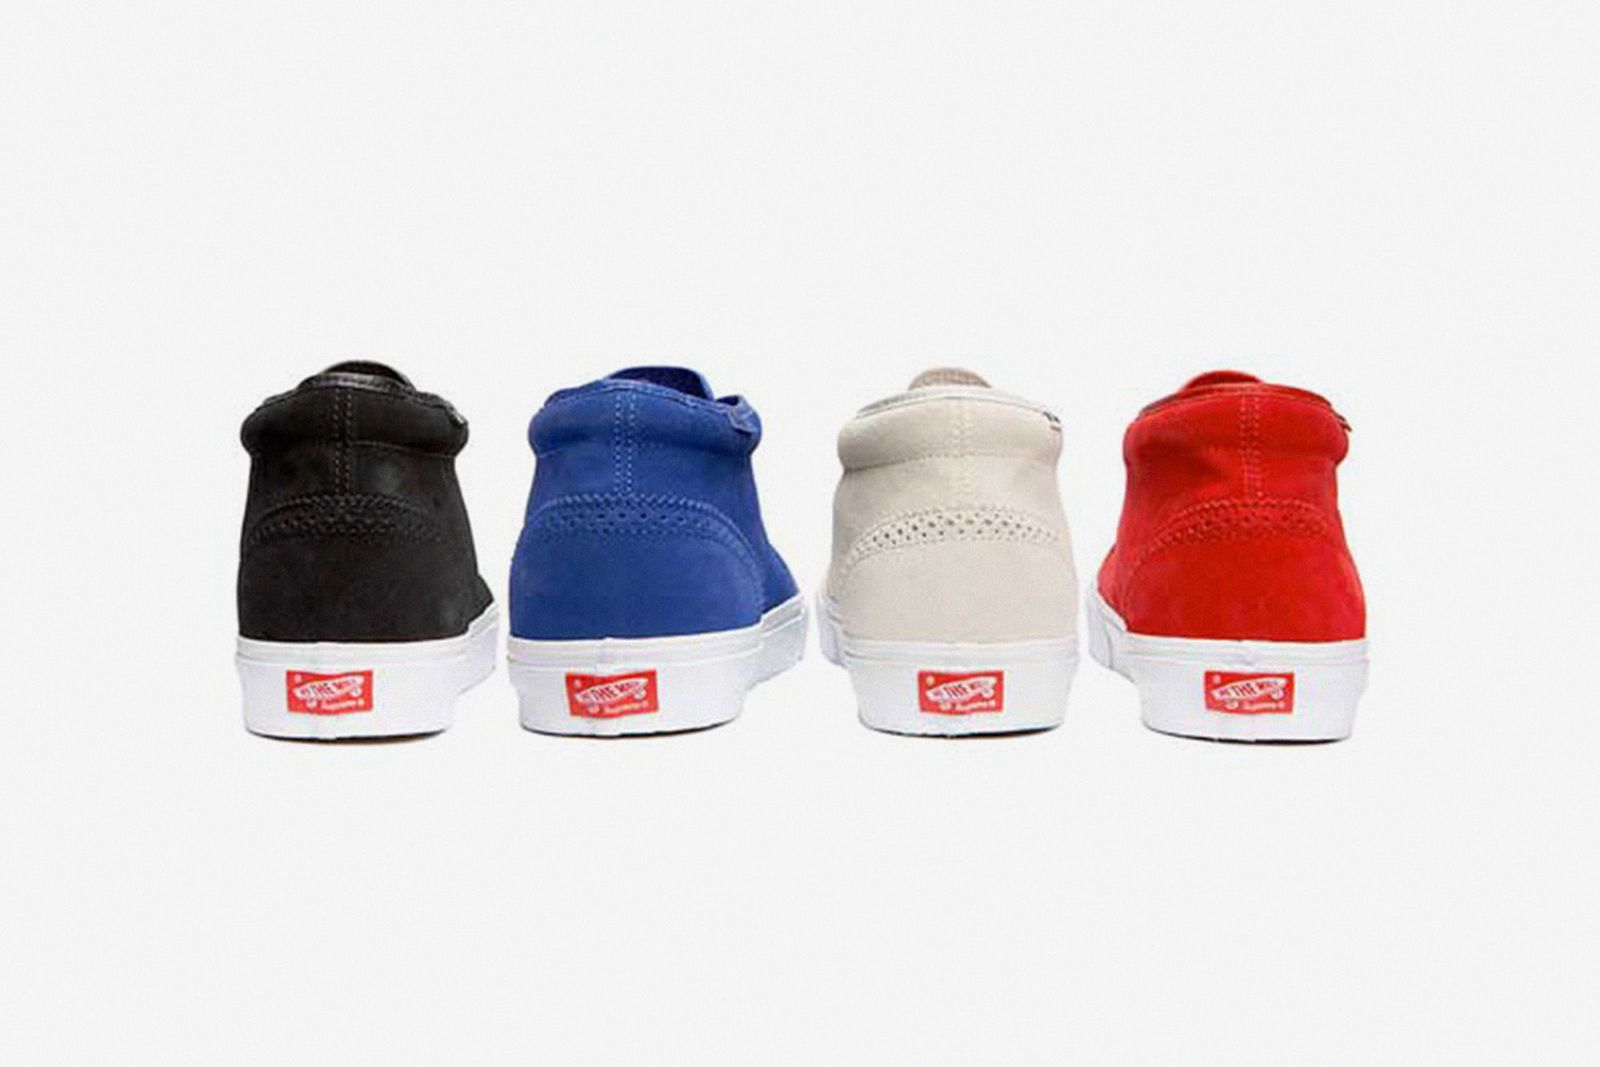 suck Go for a walk Instruct Supreme x Vans: A Full History of Collaborations